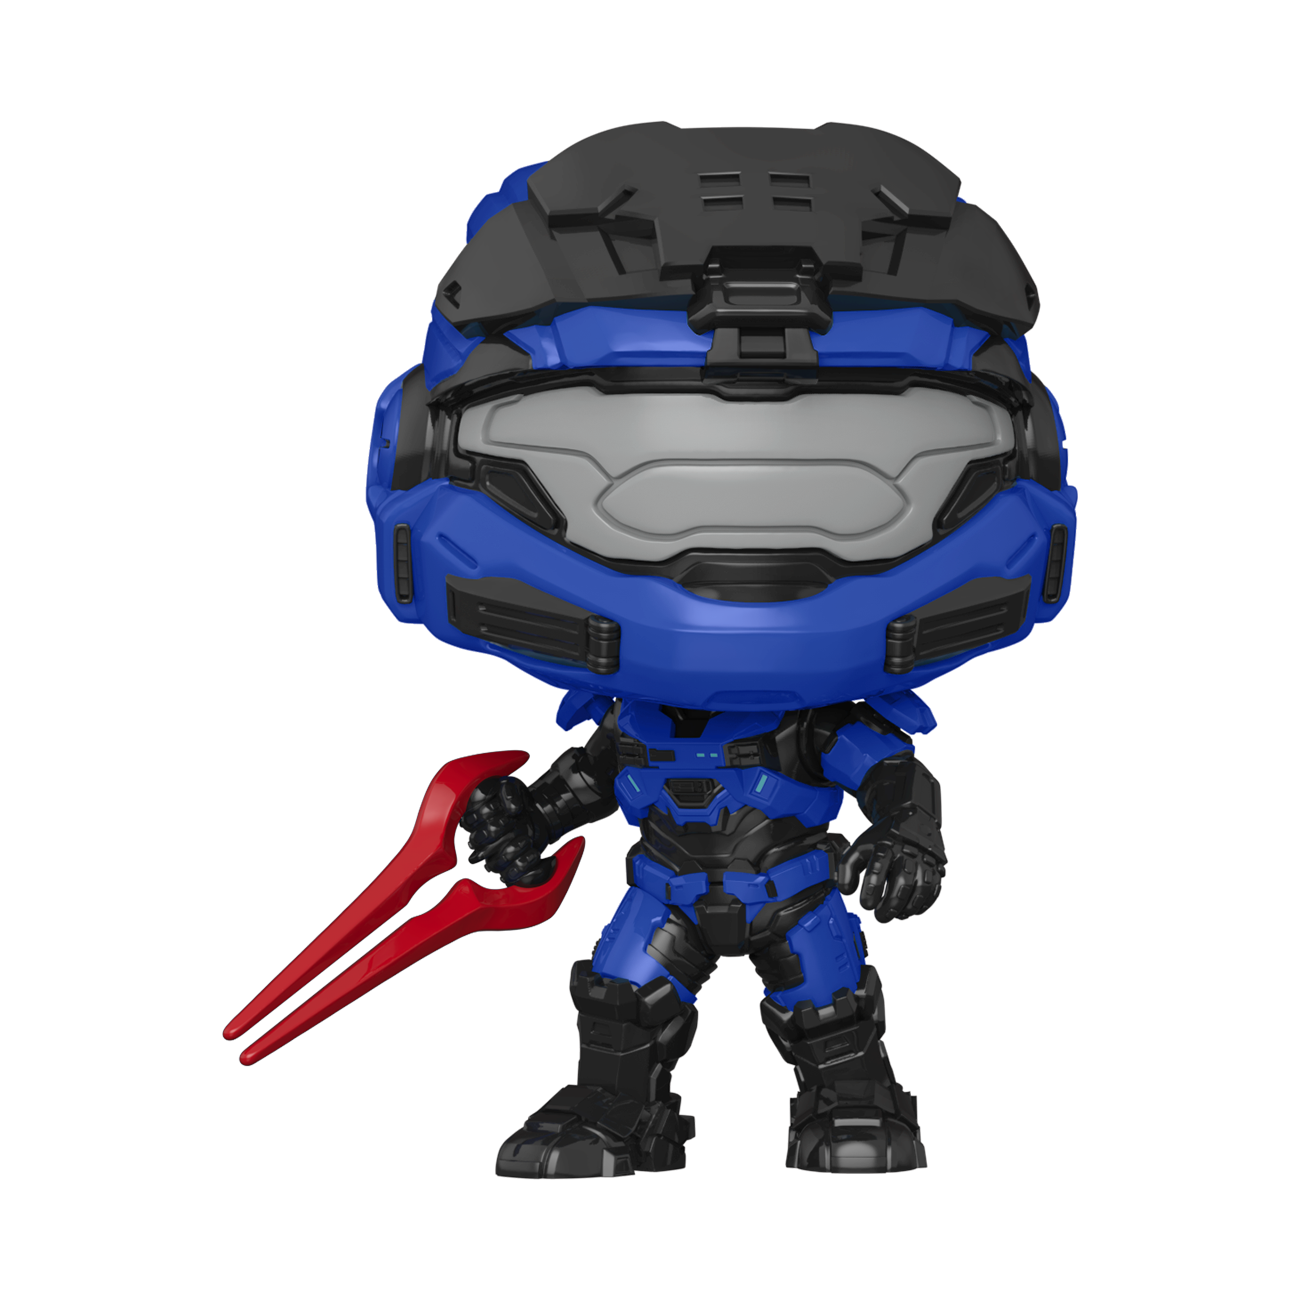 POP! Games: Halo Infinite - Mark V w/ Red Sword (Chase Edition)